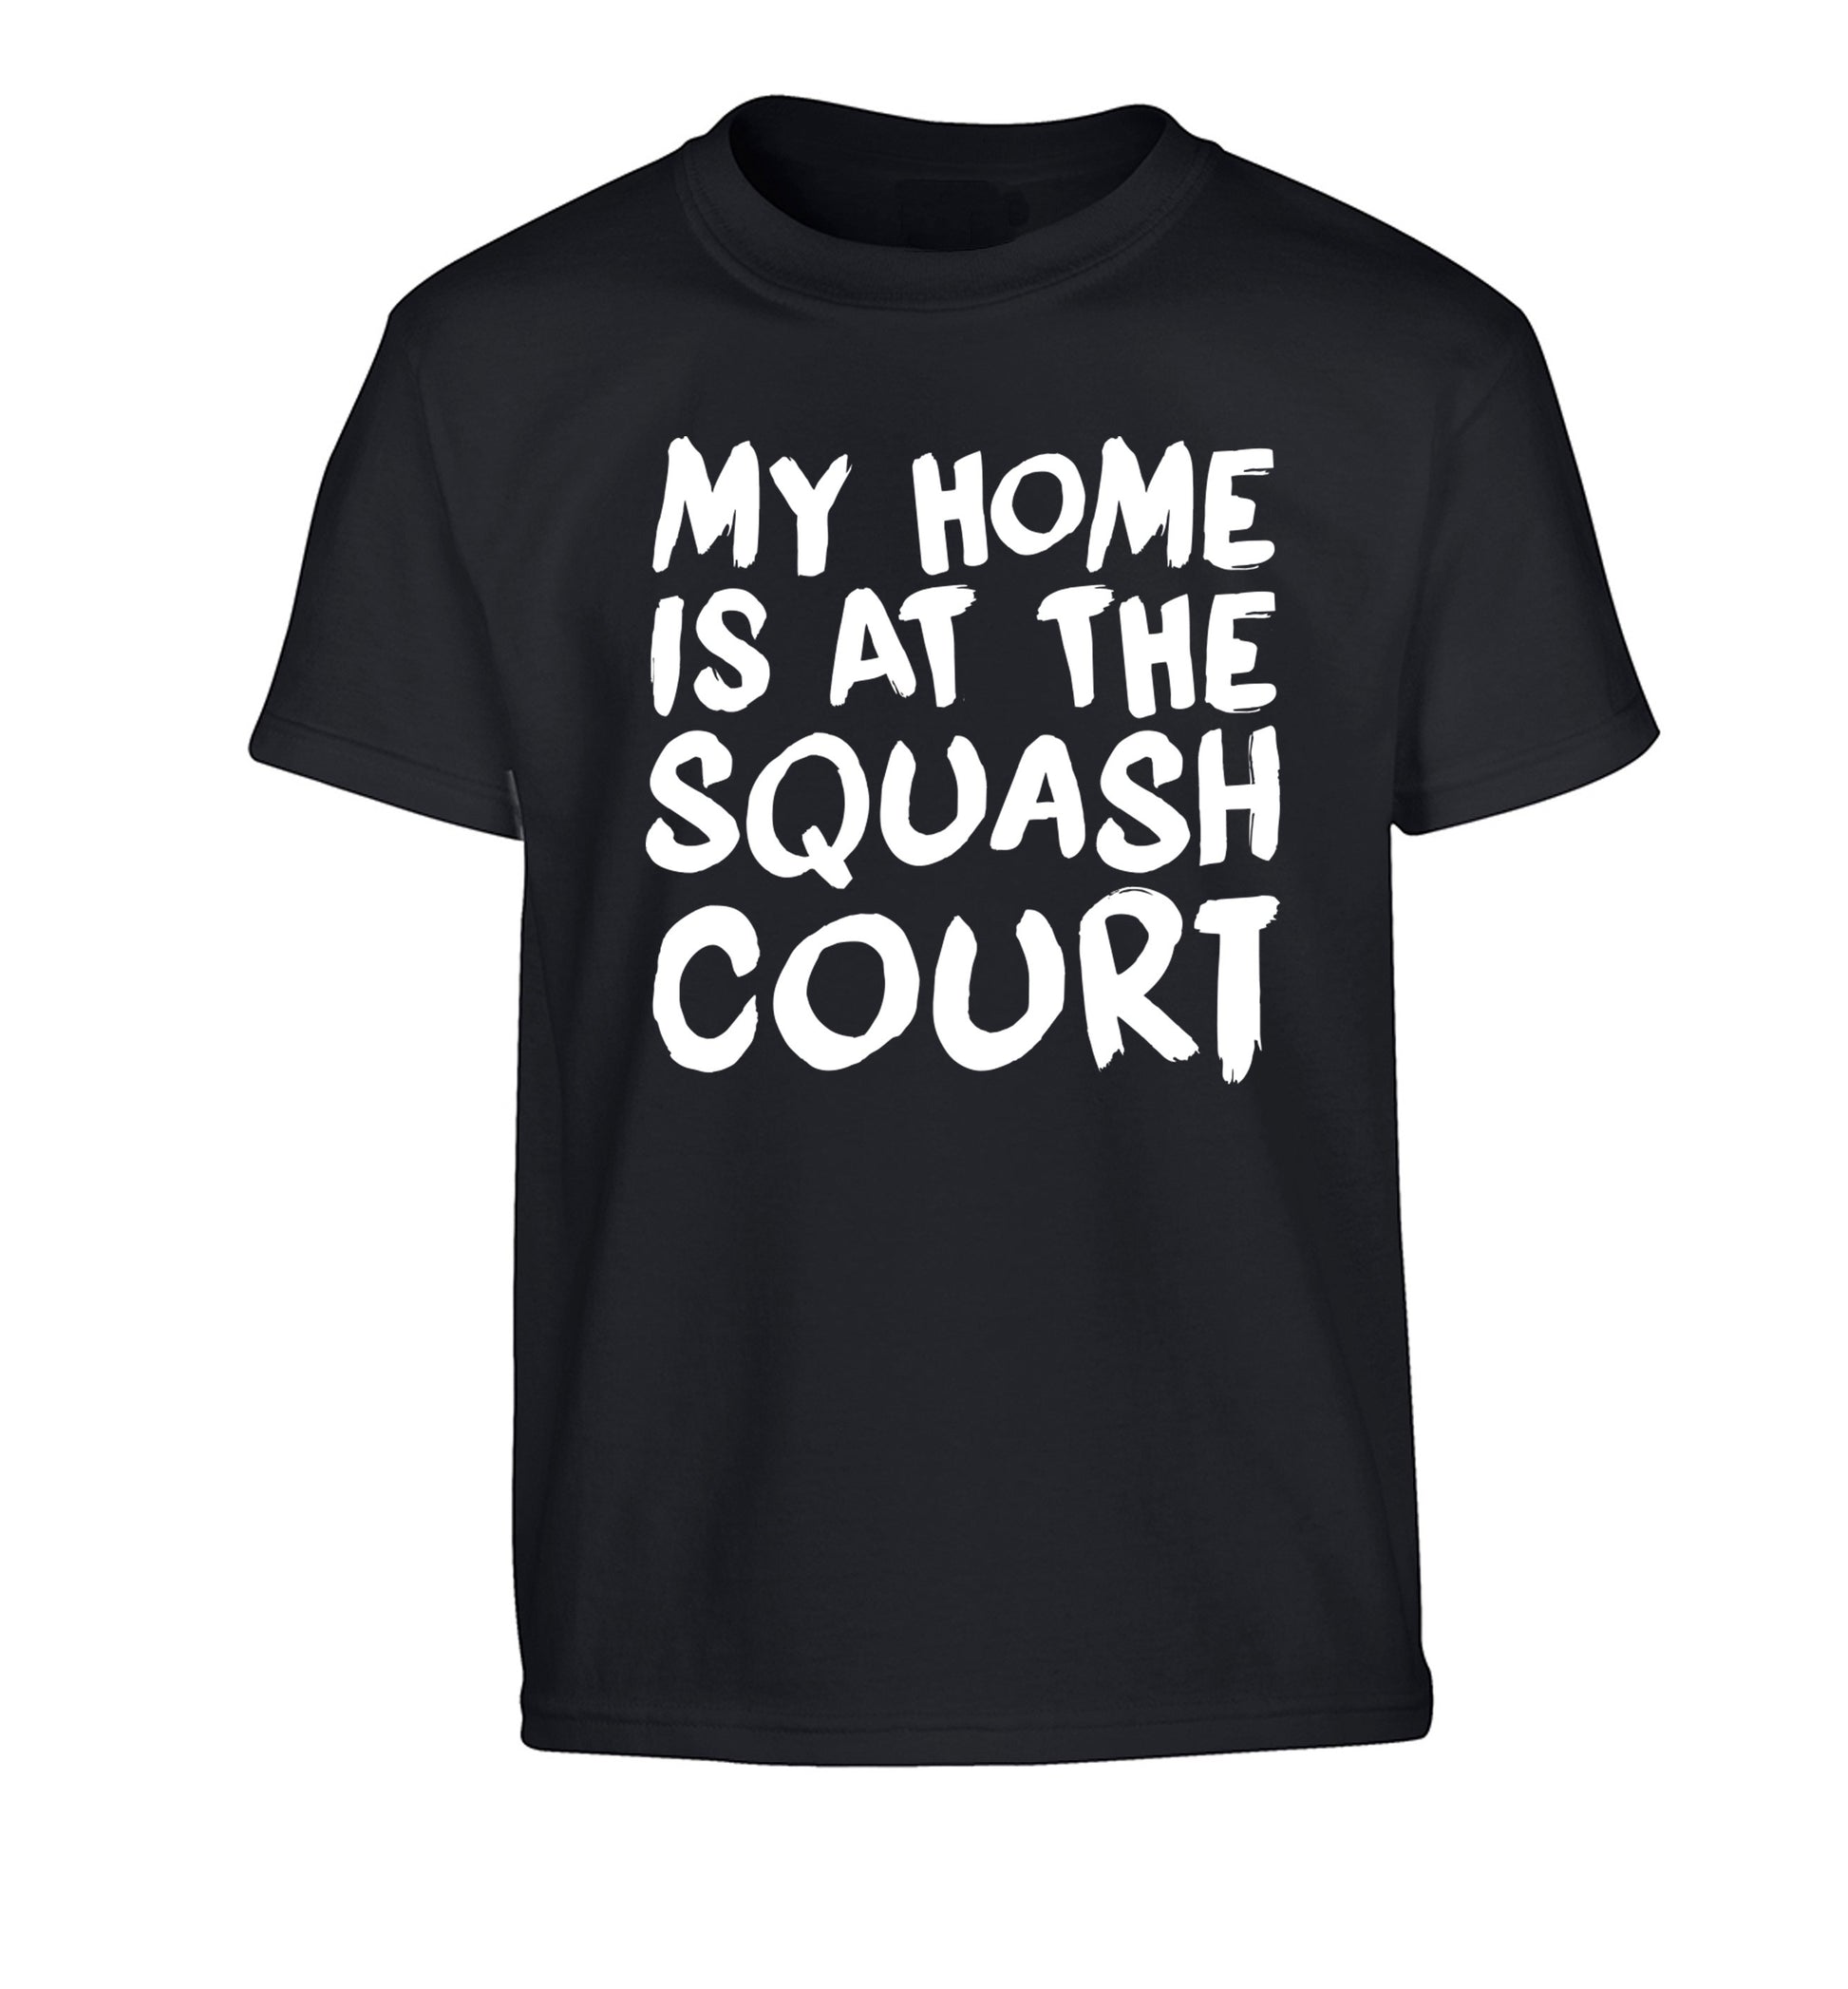 My home is at the squash court Children's black Tshirt 12-14 Years